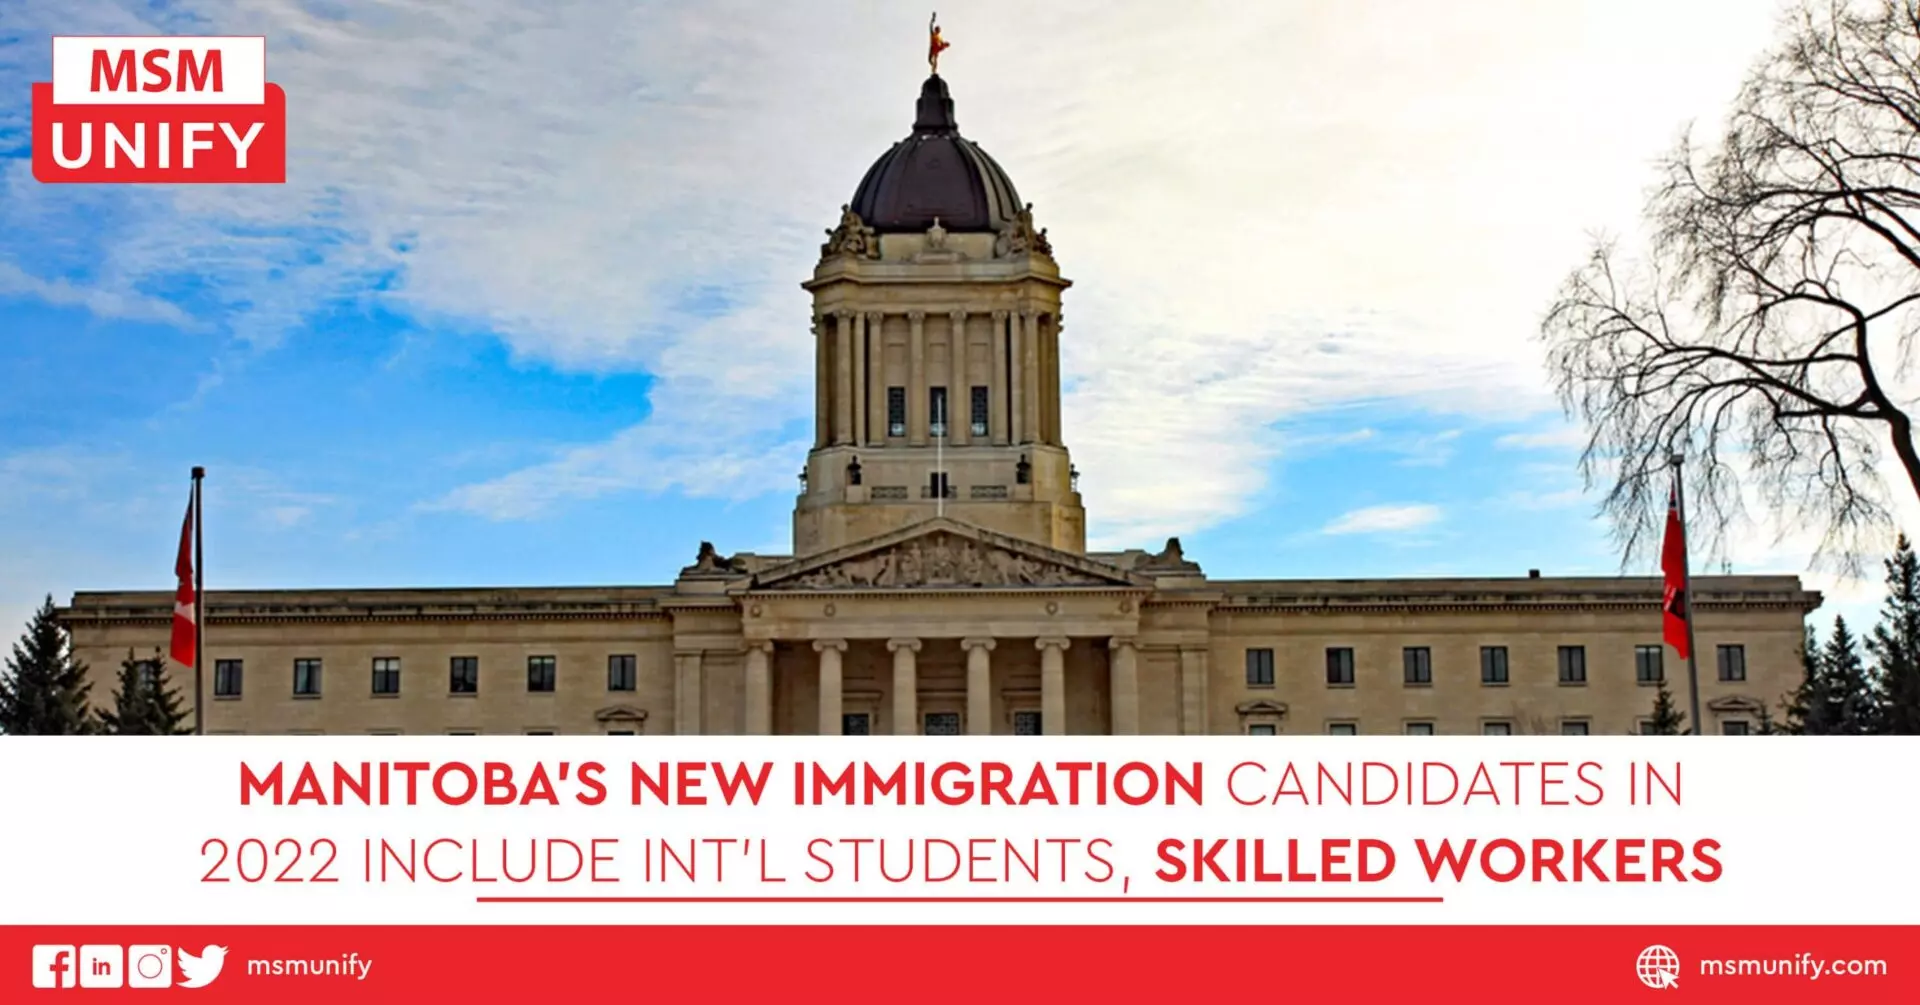 Manitobas New Immigration Candidates in 2022 Include Intl Students Skilled Workers scaled 1